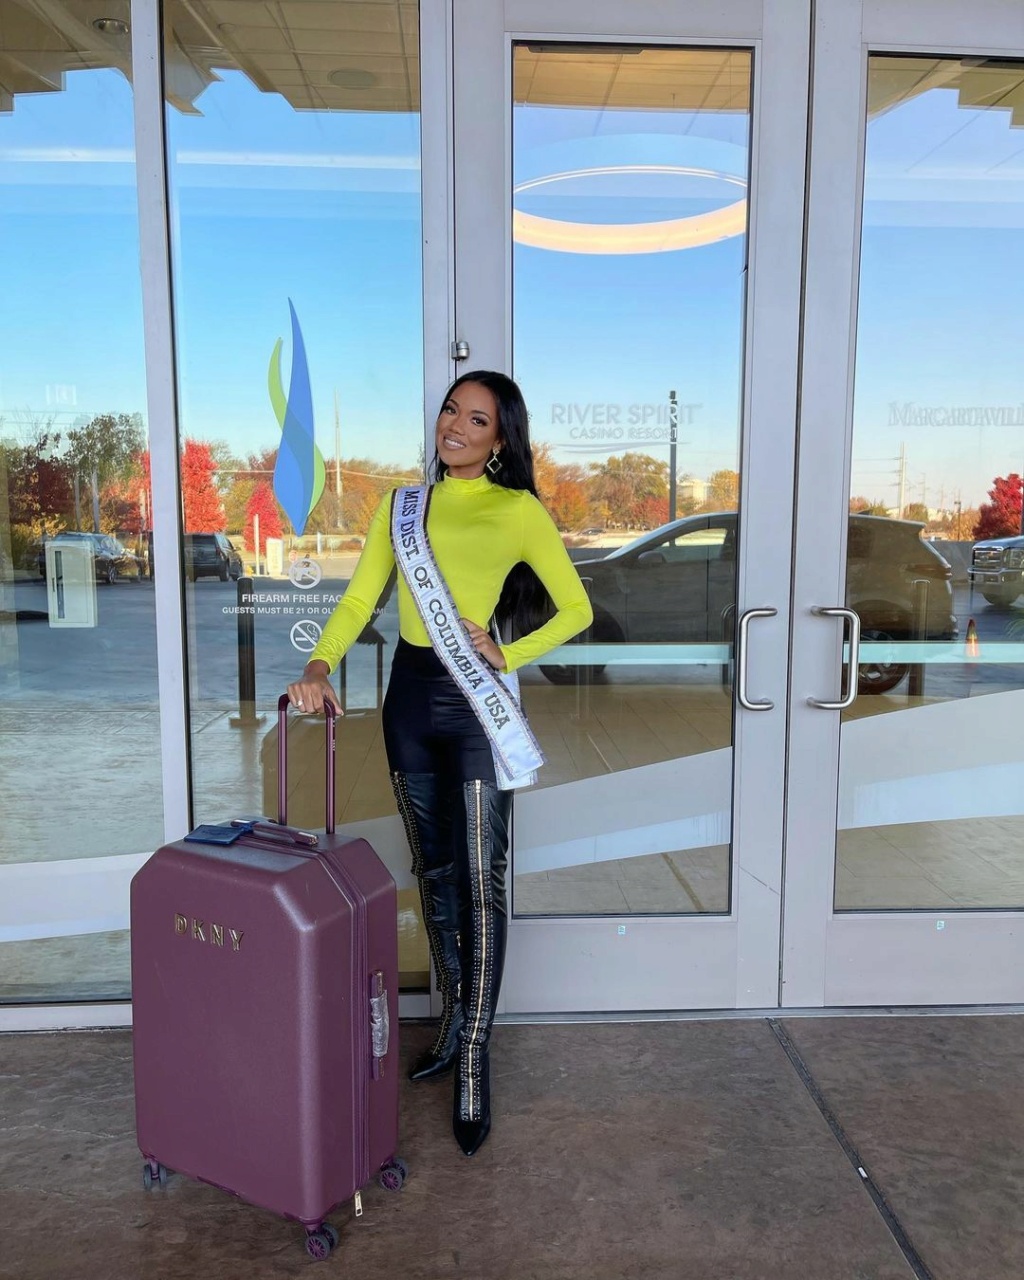 ROAD TO MISS USA 2021 is KENTUCKY! - Page 7 25968610